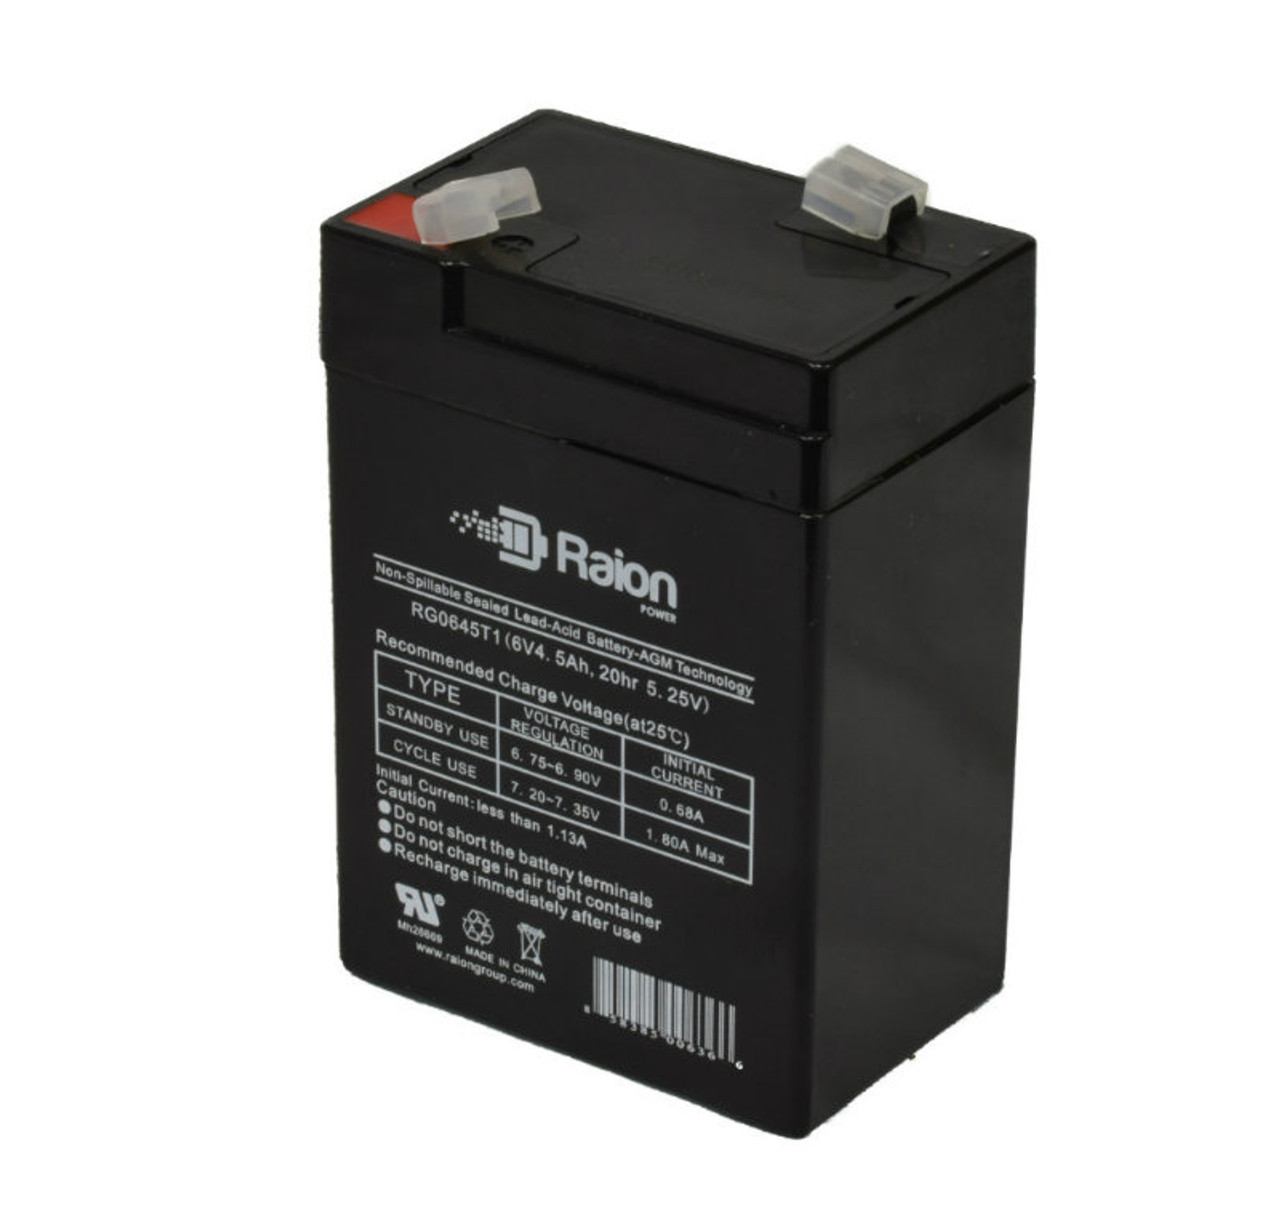 Raion Power RG0645T1 6V 4.5Ah Replacement Battery Cartridge for Lithonia ELM-2513